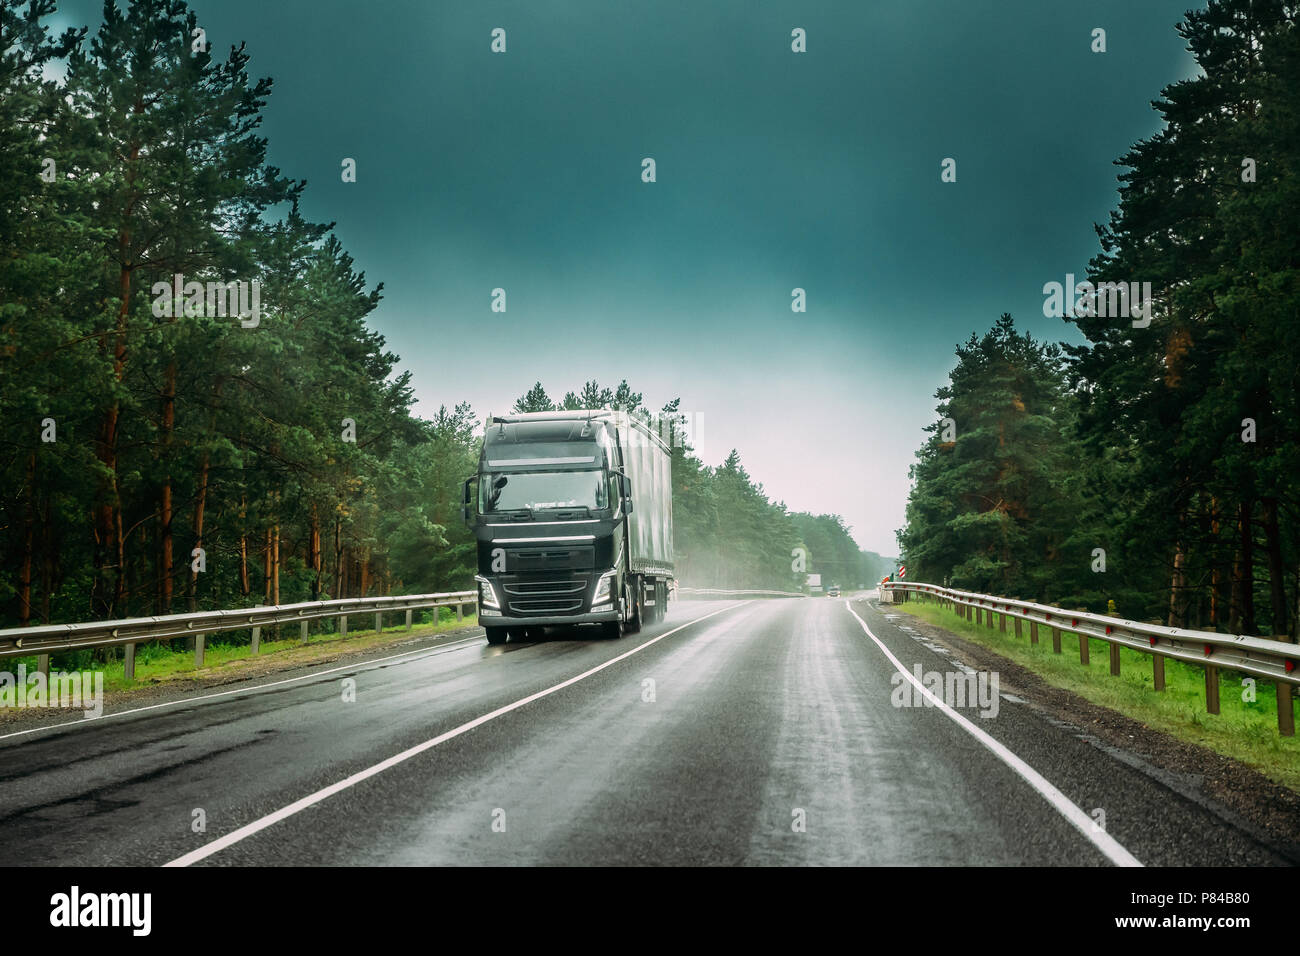 Black Truck Or Tractor Unit, Prime Mover, Traction Unit In Motion On Road, Freeway. Asphalt Motorway Highway Against Background Of Forest Landscape. B Stock Photo